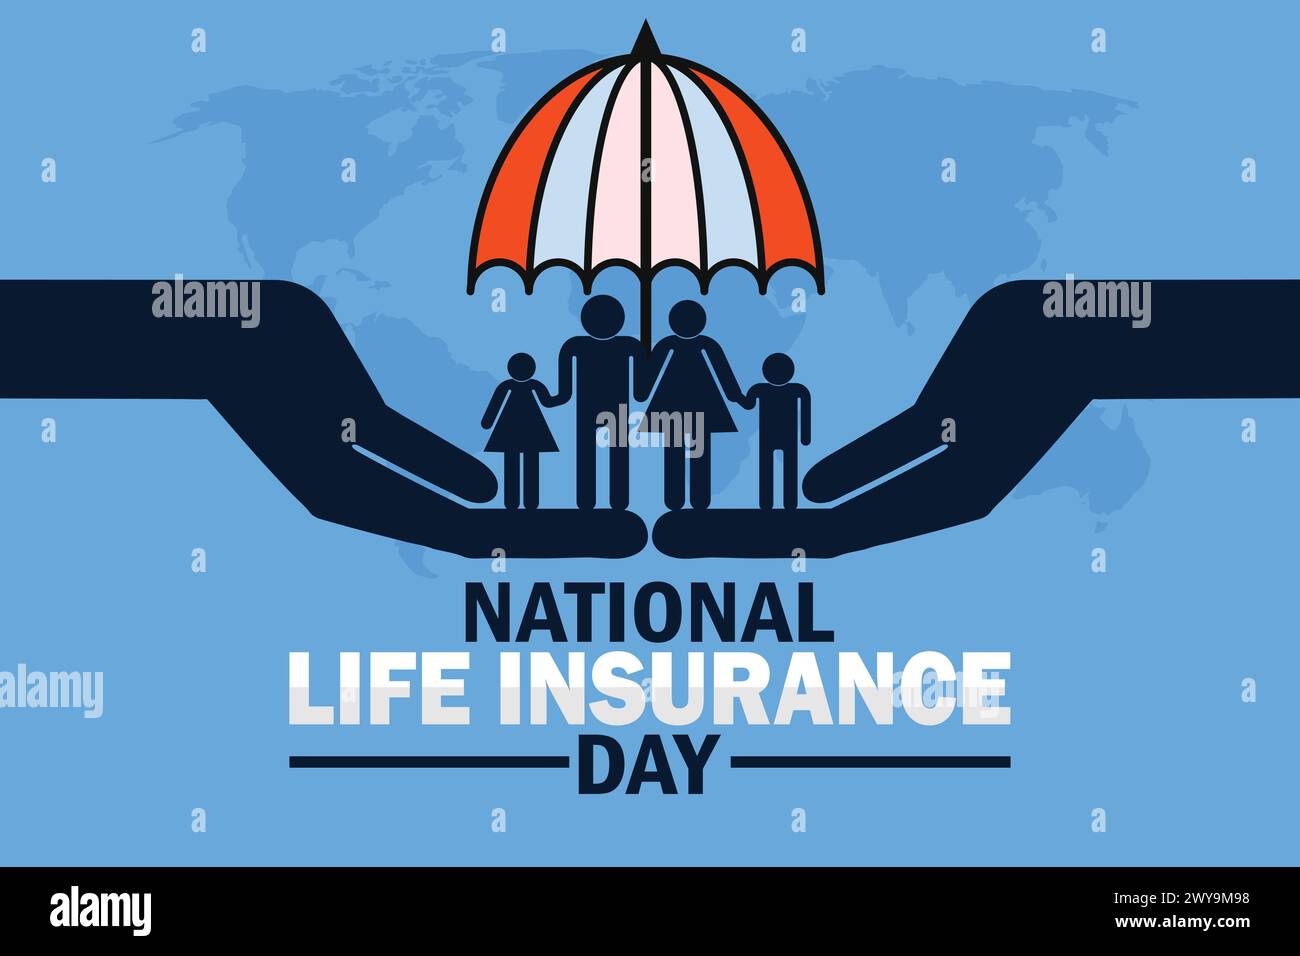 National Life Insurance day wallpaper with shapes and typography. National Life Insurance day, background Stock Vector